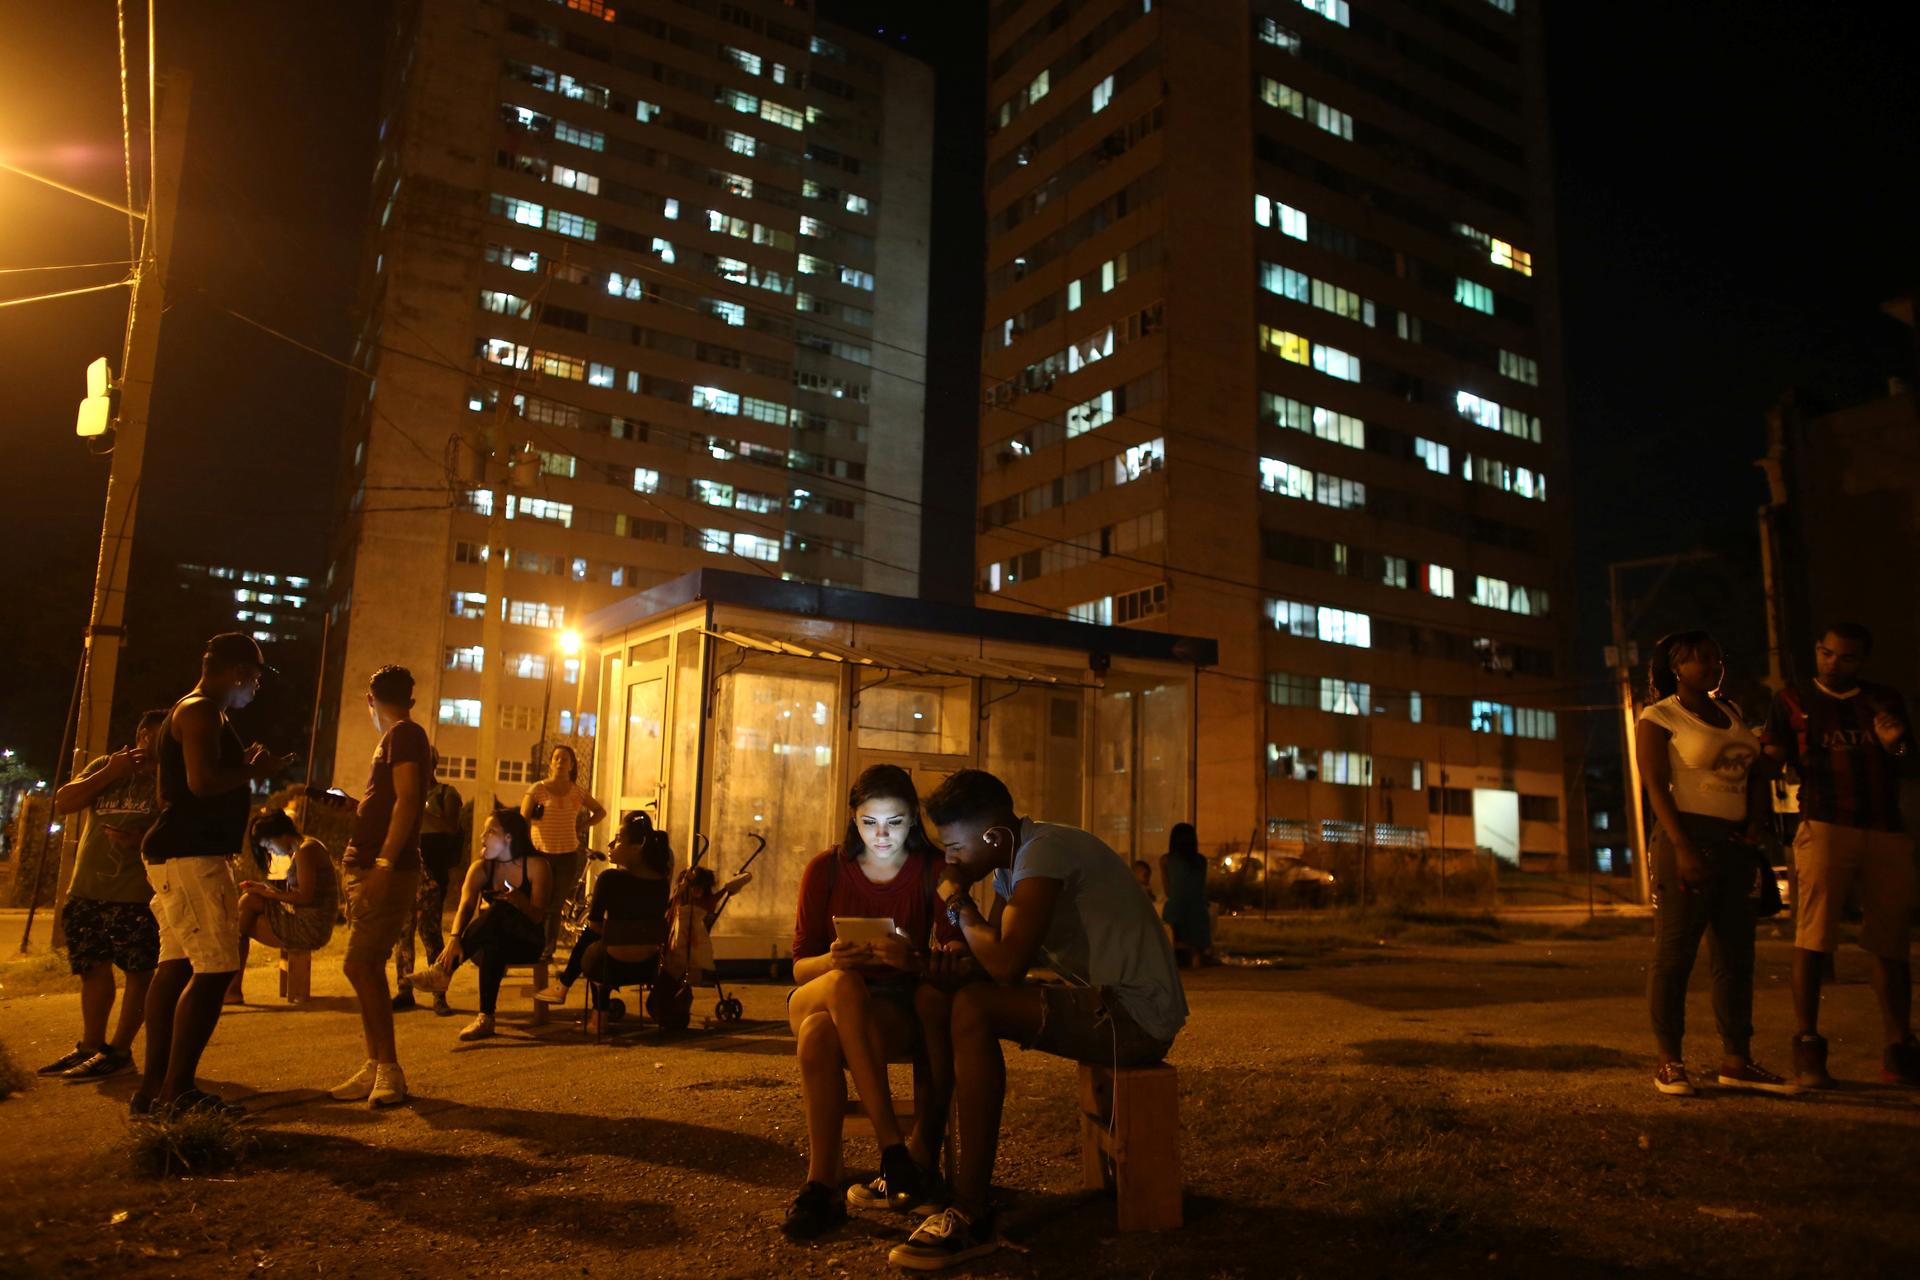 Carolina Gutierrez (center L), 17, and Neuil Valdez, 18, use mobile phones to connect to the internet at a hotspot in downtown Havana, Cuba, December 12, 2016.